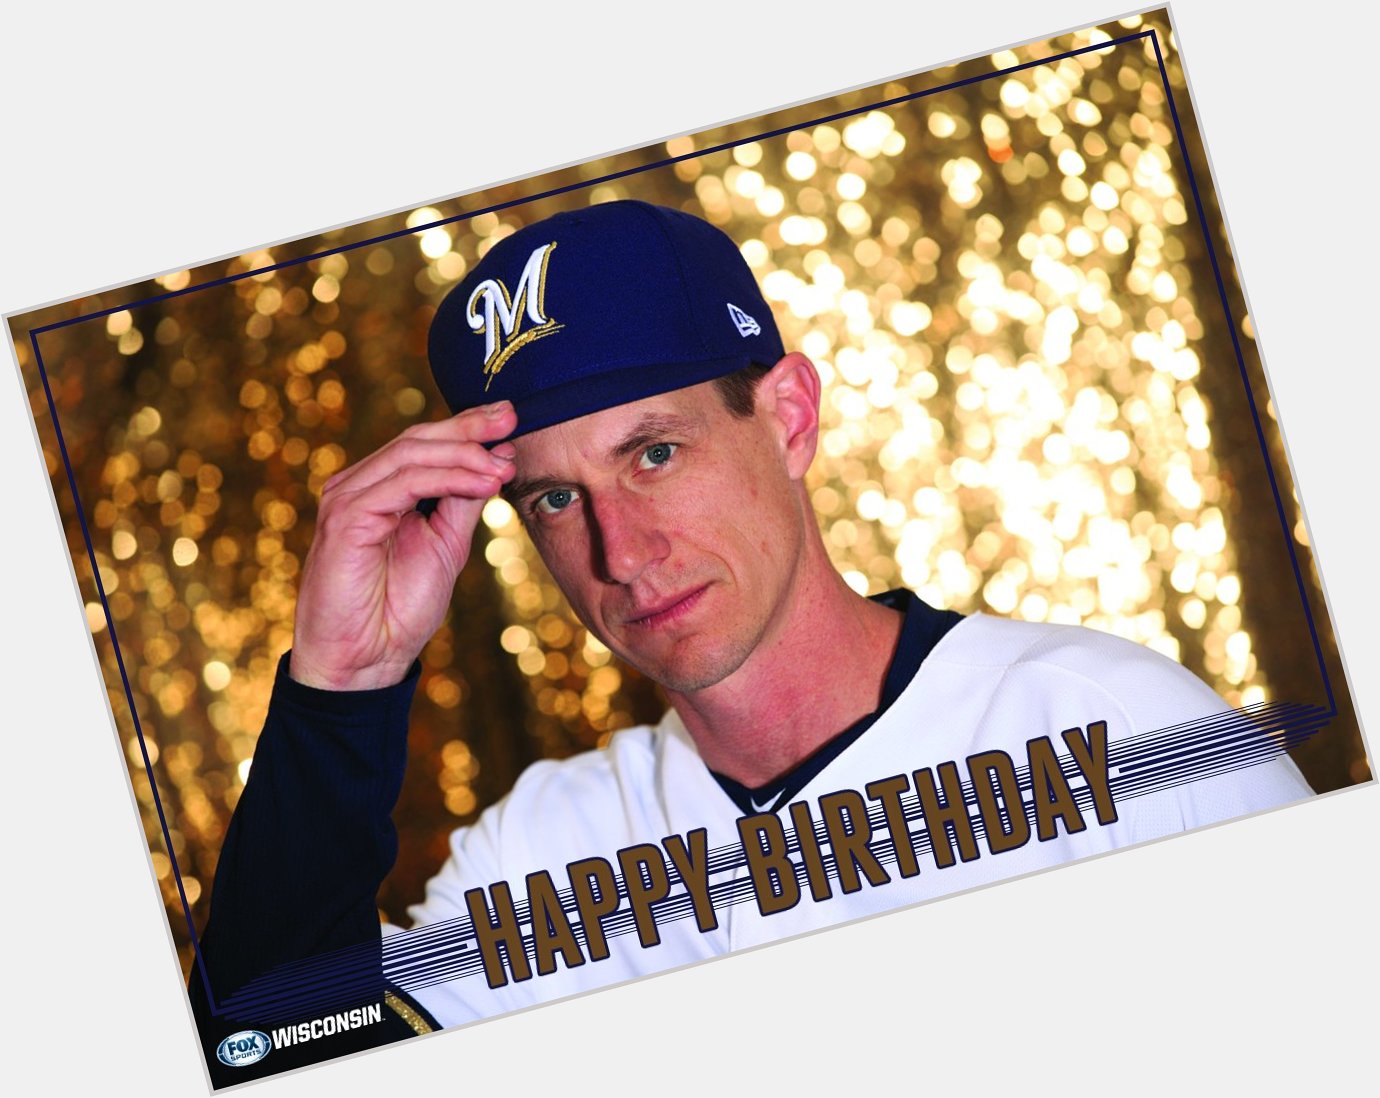 He\s in our hearts today and every day as he leads the Brew Crew to - wishing Craig Counsell a Happy Birthday! 